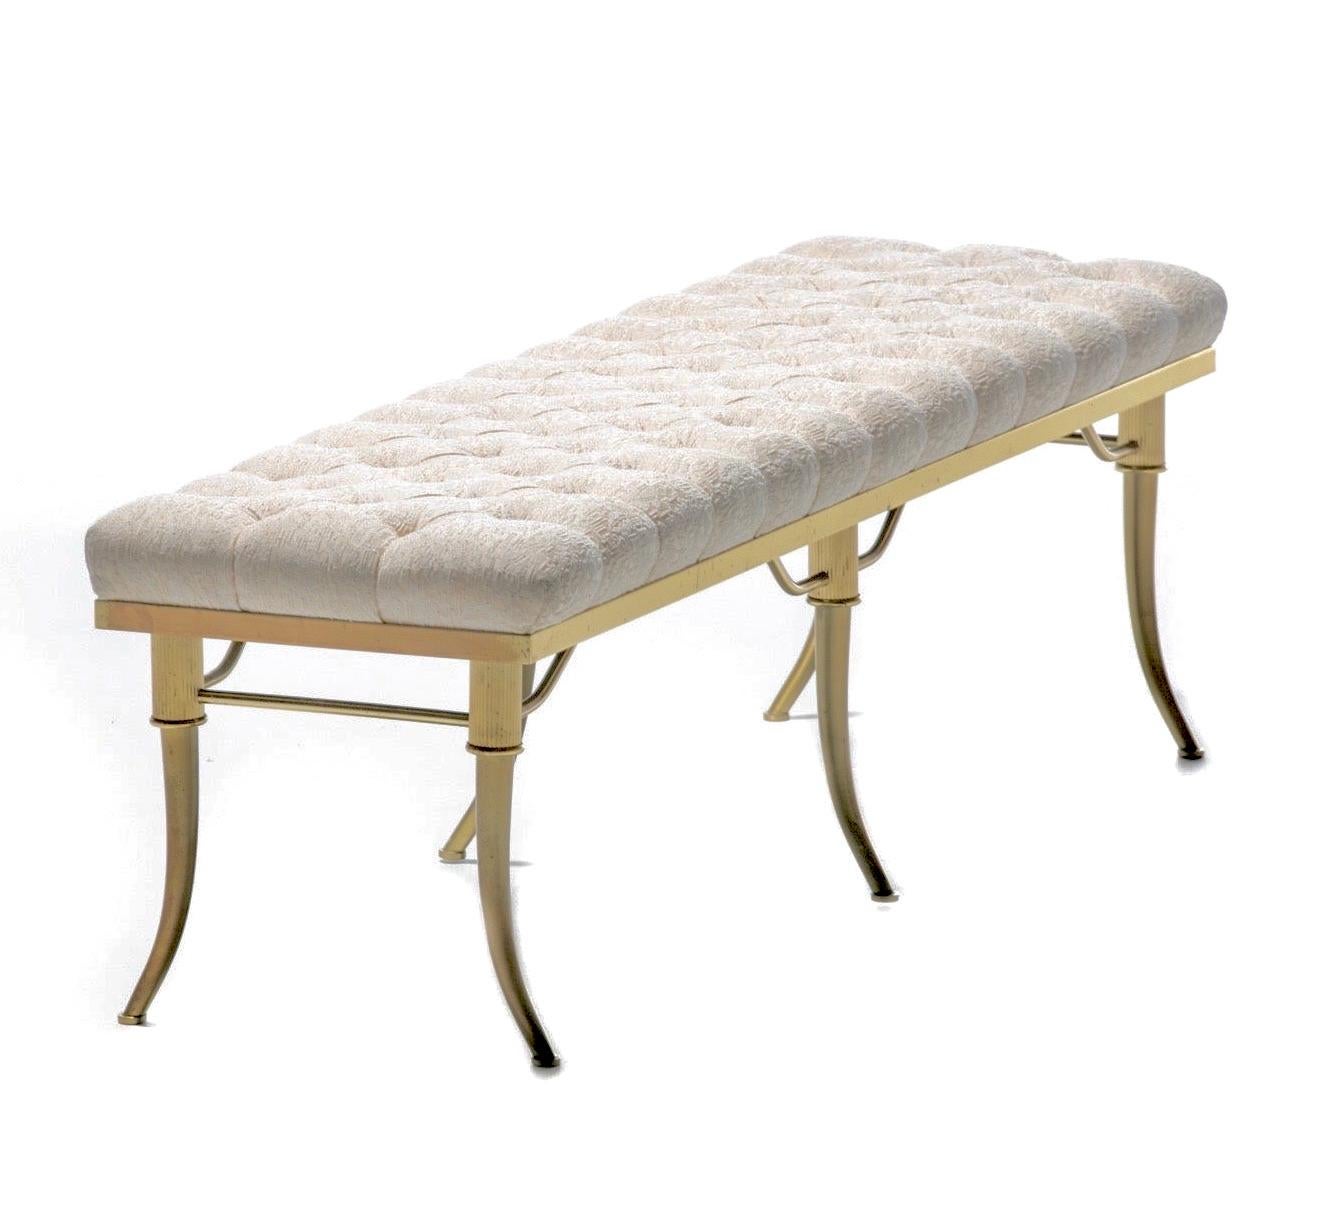 Mid-20th Century Billy Haines Brass Klismos Leg Bench with Tufted Ivory Upholstery, circa 1960